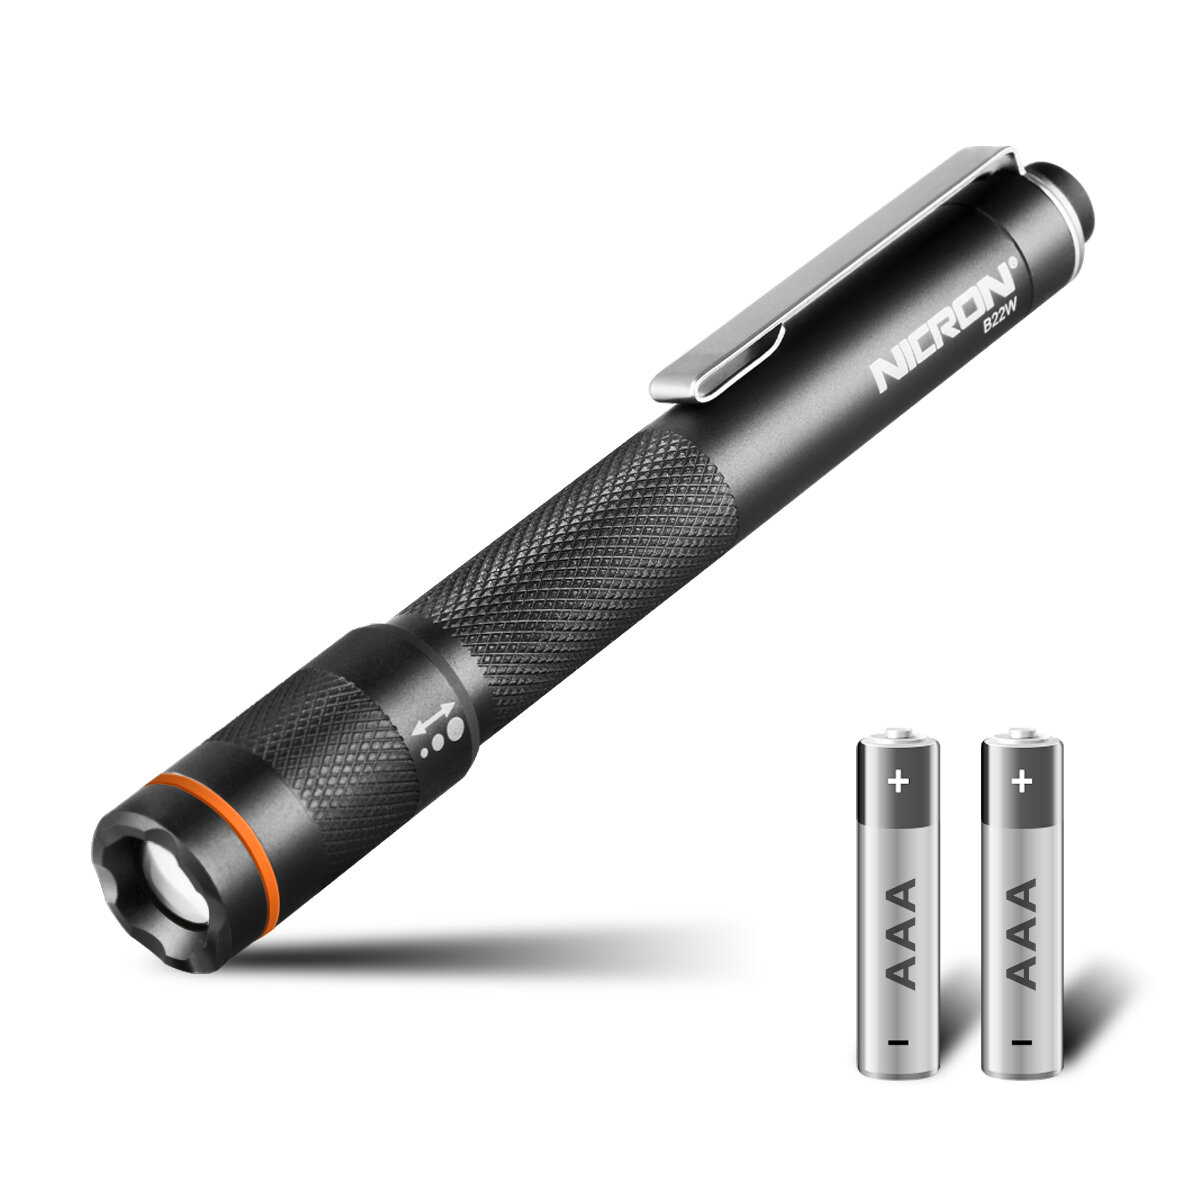 NICRON B22W LED Pocket Pen Light 120 Lumens Portable Zoomable Flashlight with Clip for Inspection Outdoor Camping Flashl